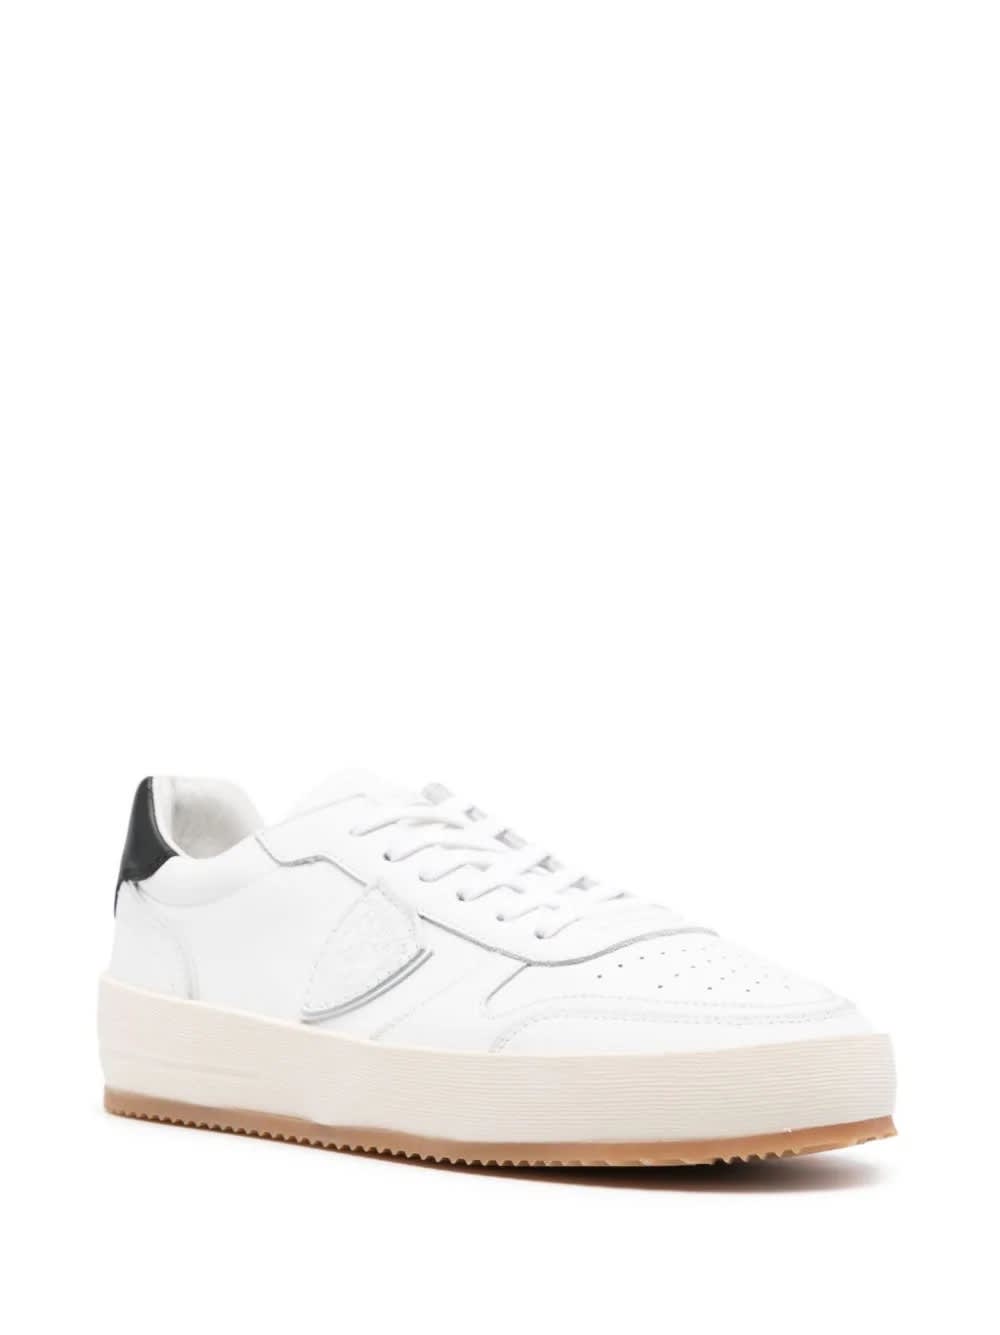 Shop Philippe Model Nice Low Sneakers - White And Black